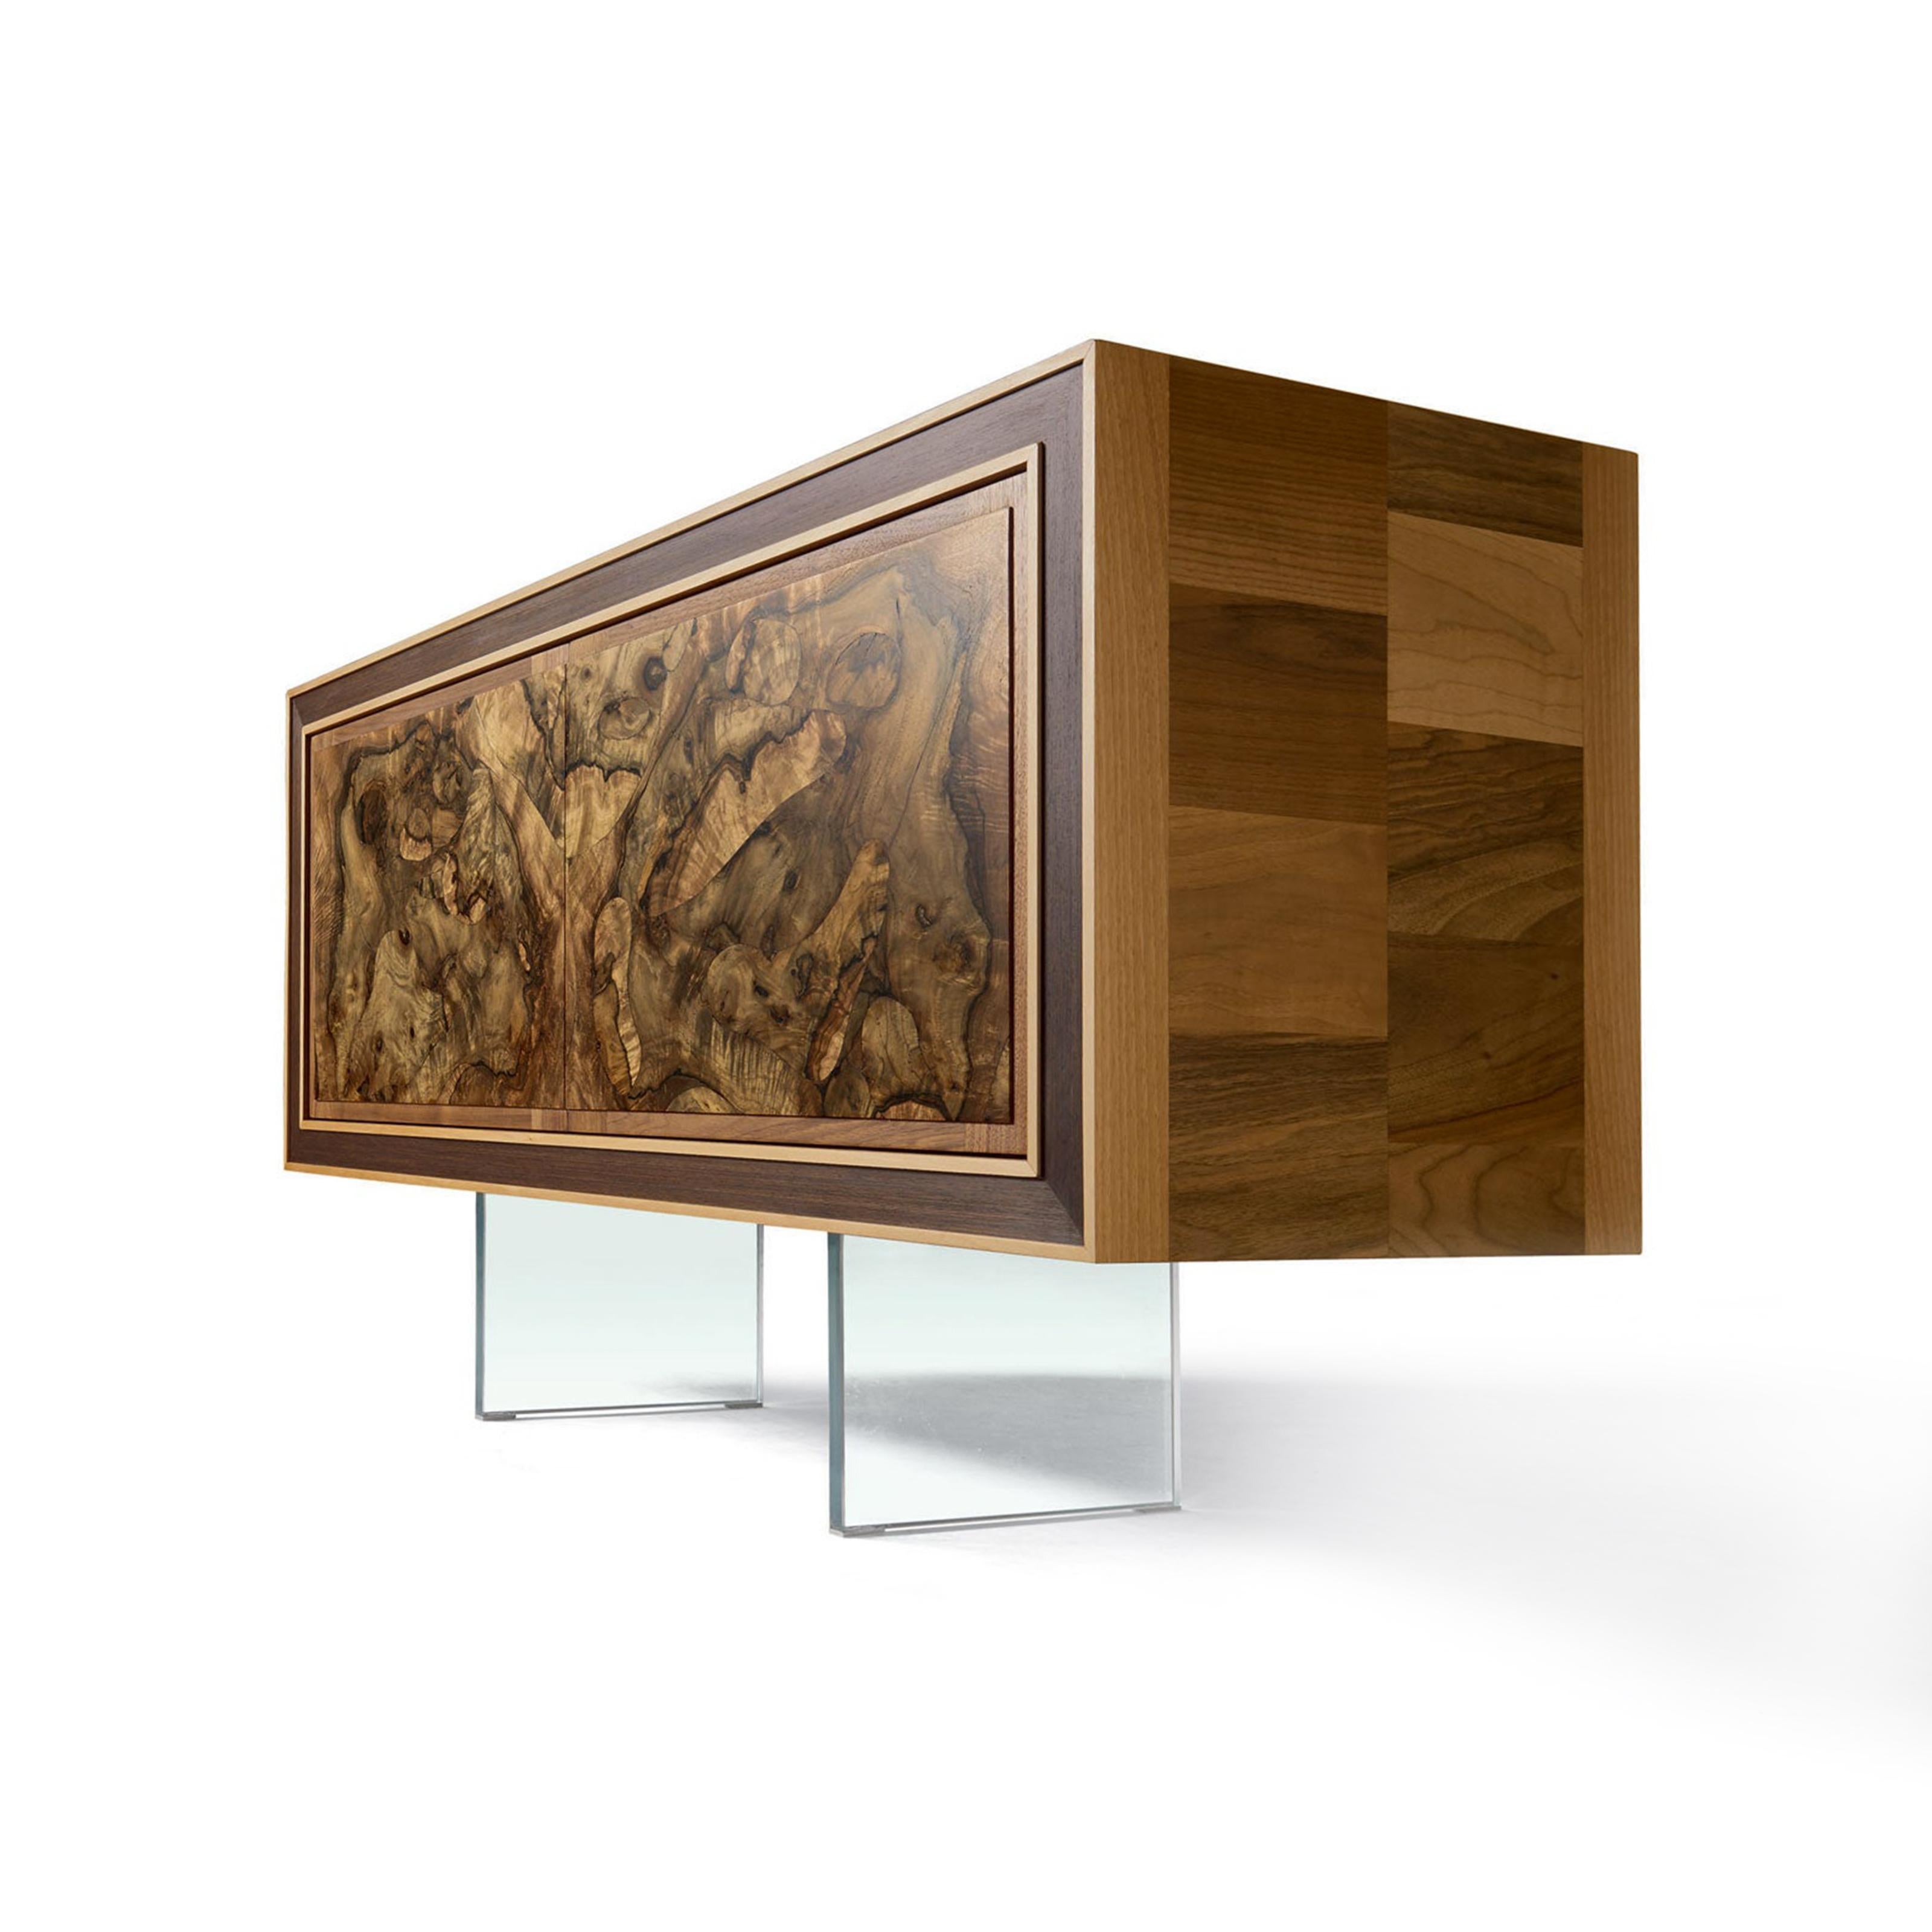 The Quadra collection of solid wood cabinets mix modern and classic designs. Each piece is unique thanks to the different grain of the wood and is finely crafted in Italy by the expert hands of our craftsmen.

Available in different dimensions:
W